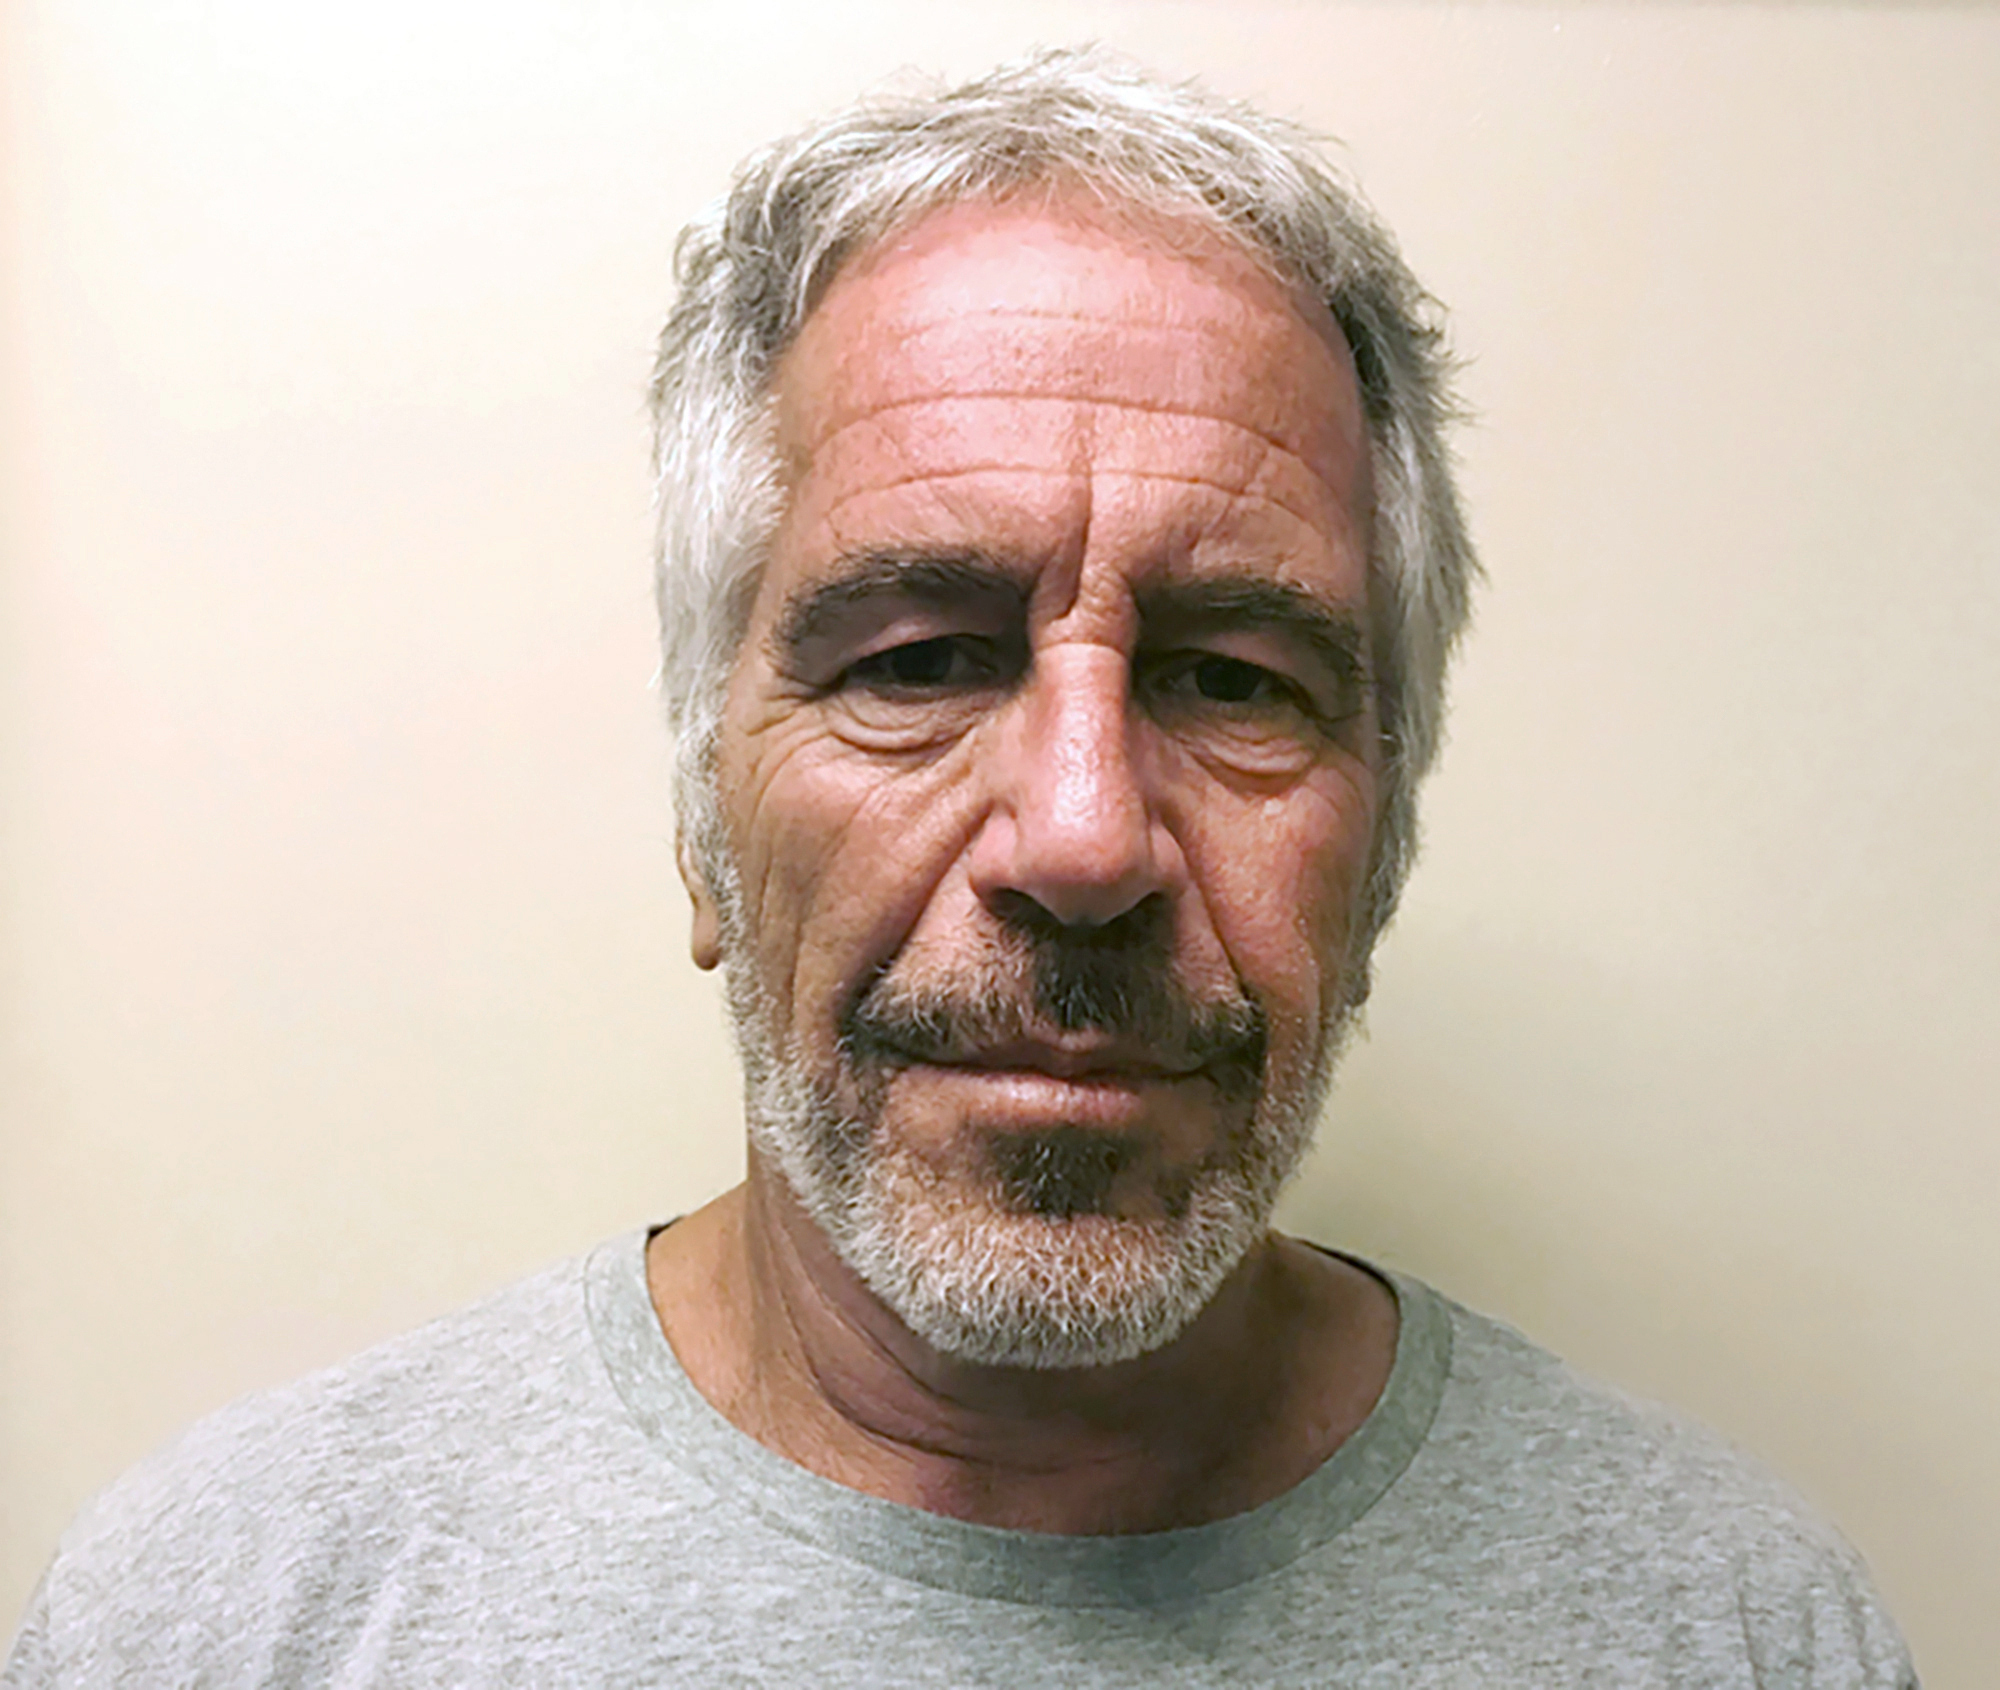 FILE - This March 28, 2017, file photo, provided by the New York State Sex Offender Registry, shows Jeffrey Epstein. Federal prosecutors said Thursday Jan. 9, 2020, that jailhouse video no longer exists of the area around Jeffrey Epstein's jail cell 